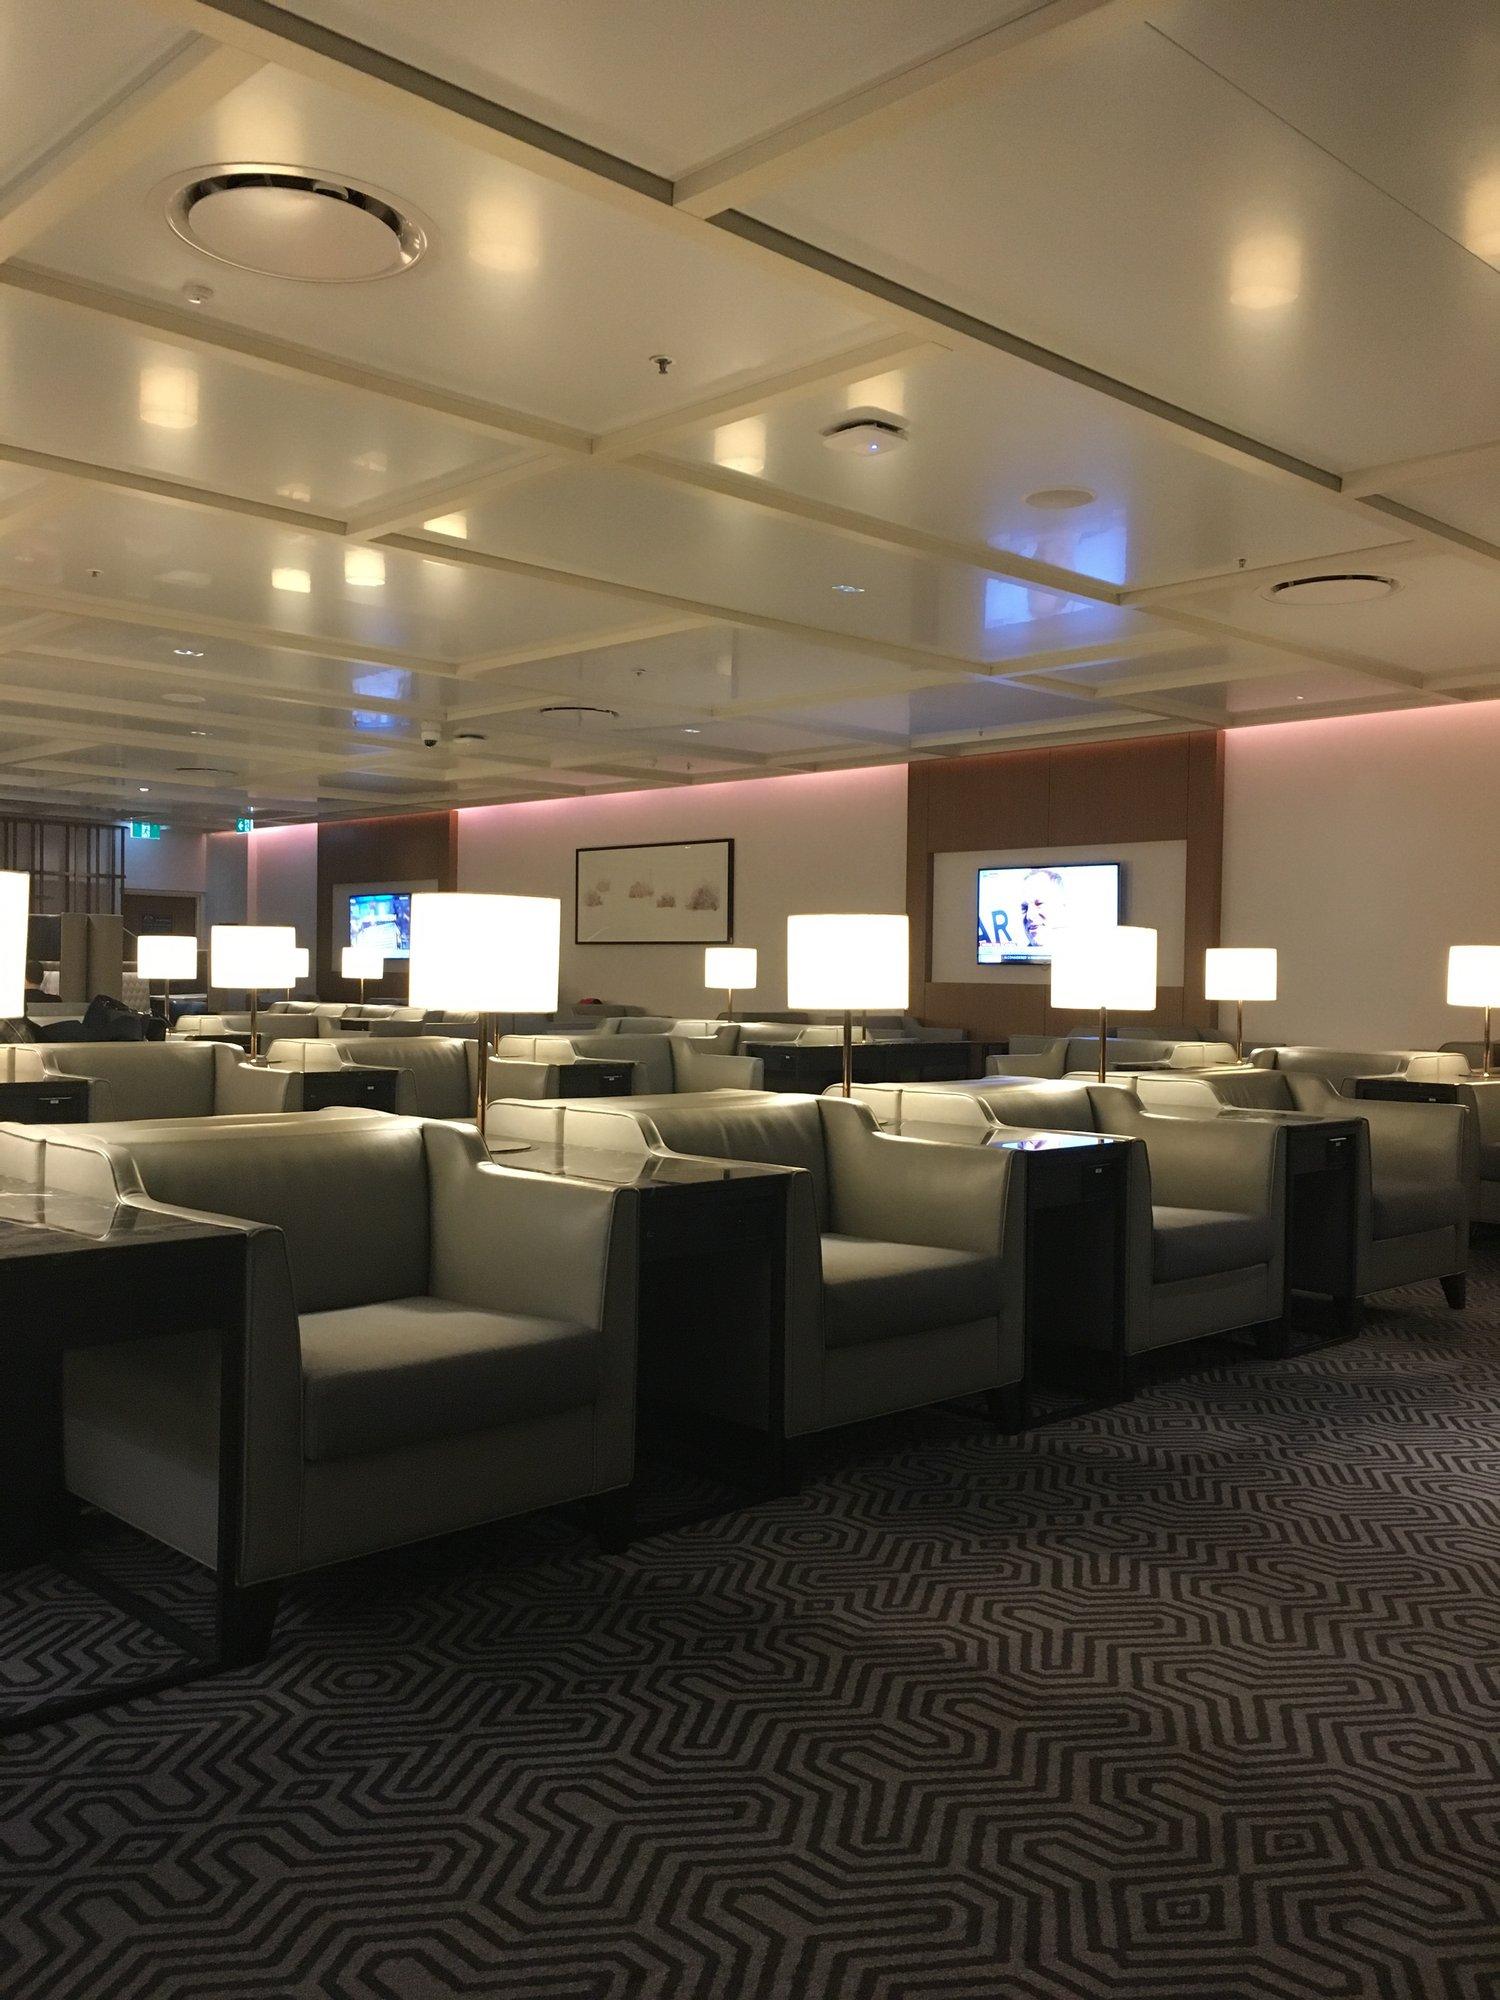 Singapore Airlines SilverKris Business Class Lounge image 20 of 20